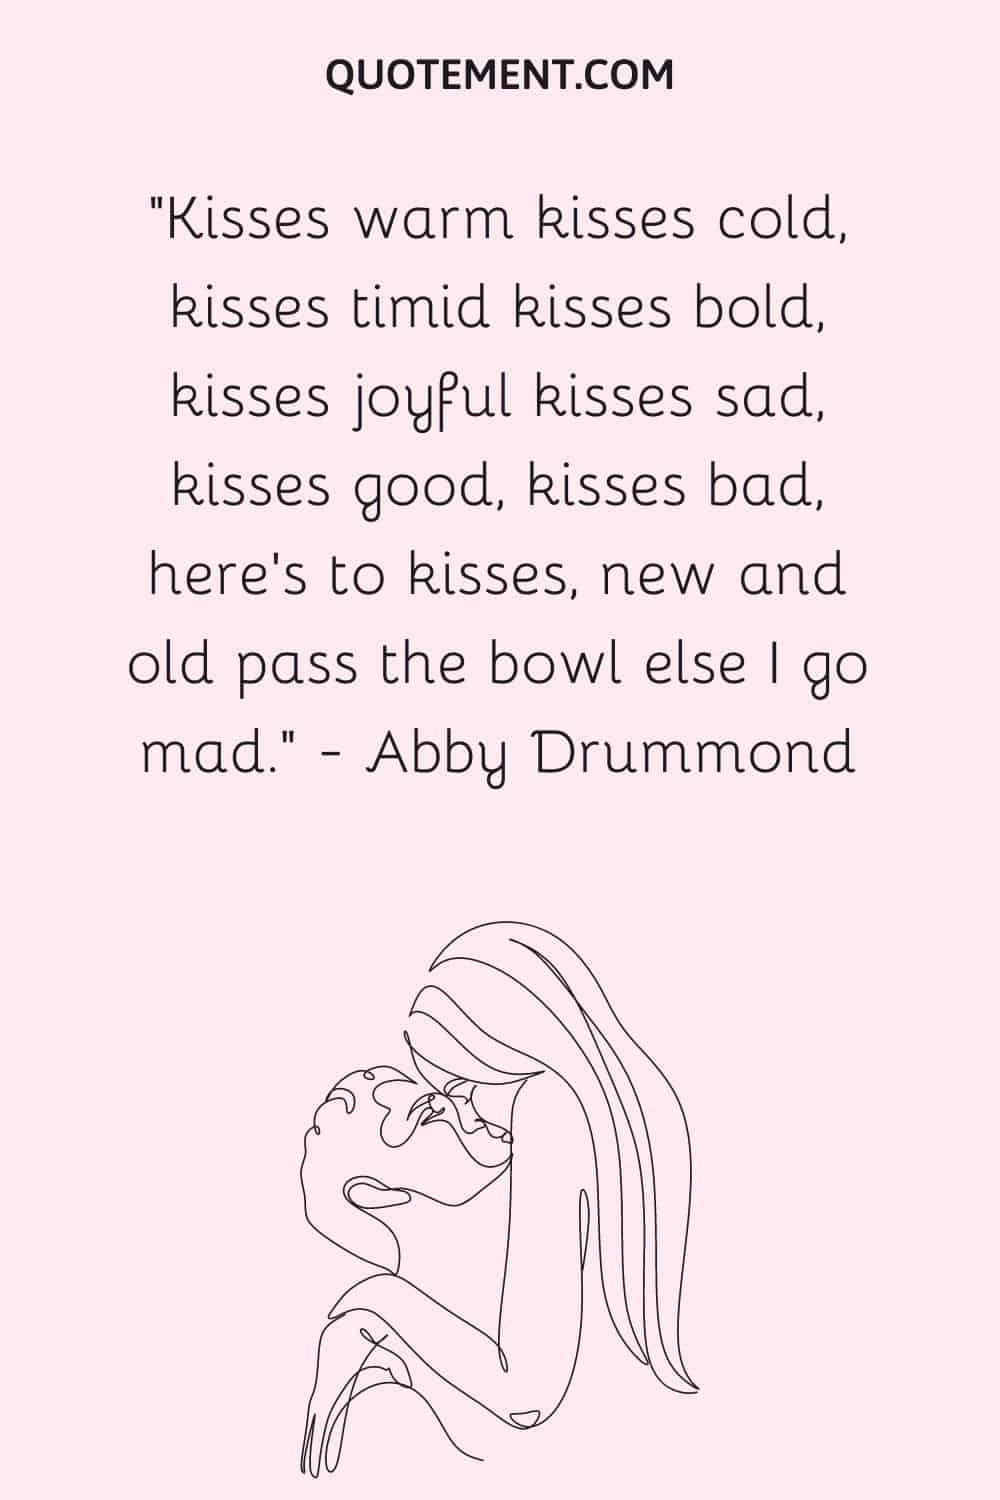 Kisses warm kisses cold, kisses timid kisses bold, kisses joyful kisses sad, kisses good, kisses bad, here's to kisses, new and old pass the bowl else I go mad. ― Abby Drummond